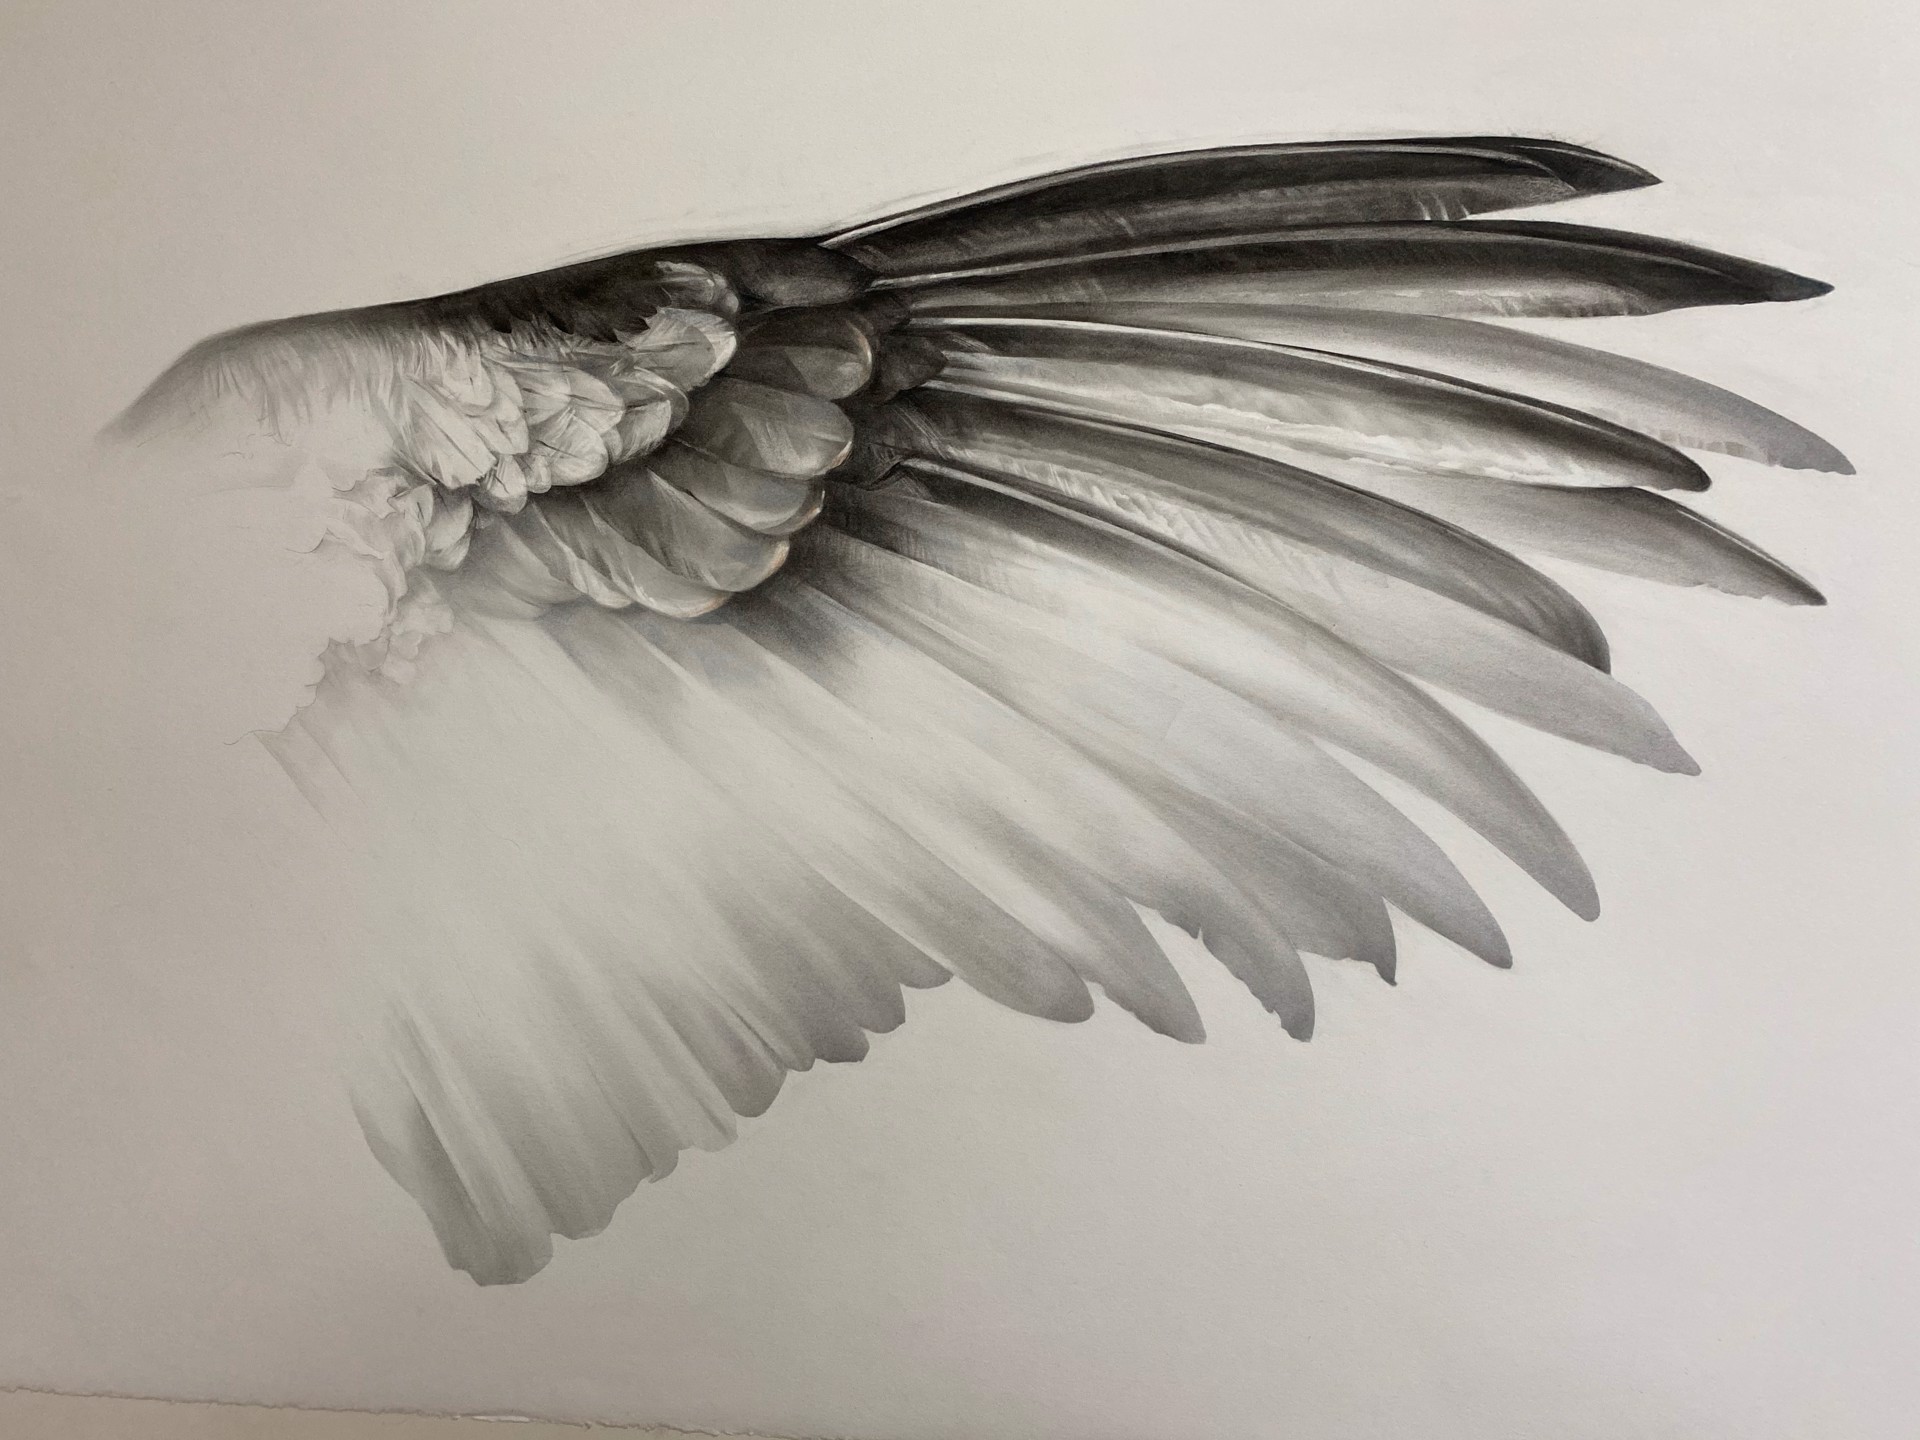 Arthur’s Wing: Leading Edge no. 1 (condor feather) by Susan Manchester